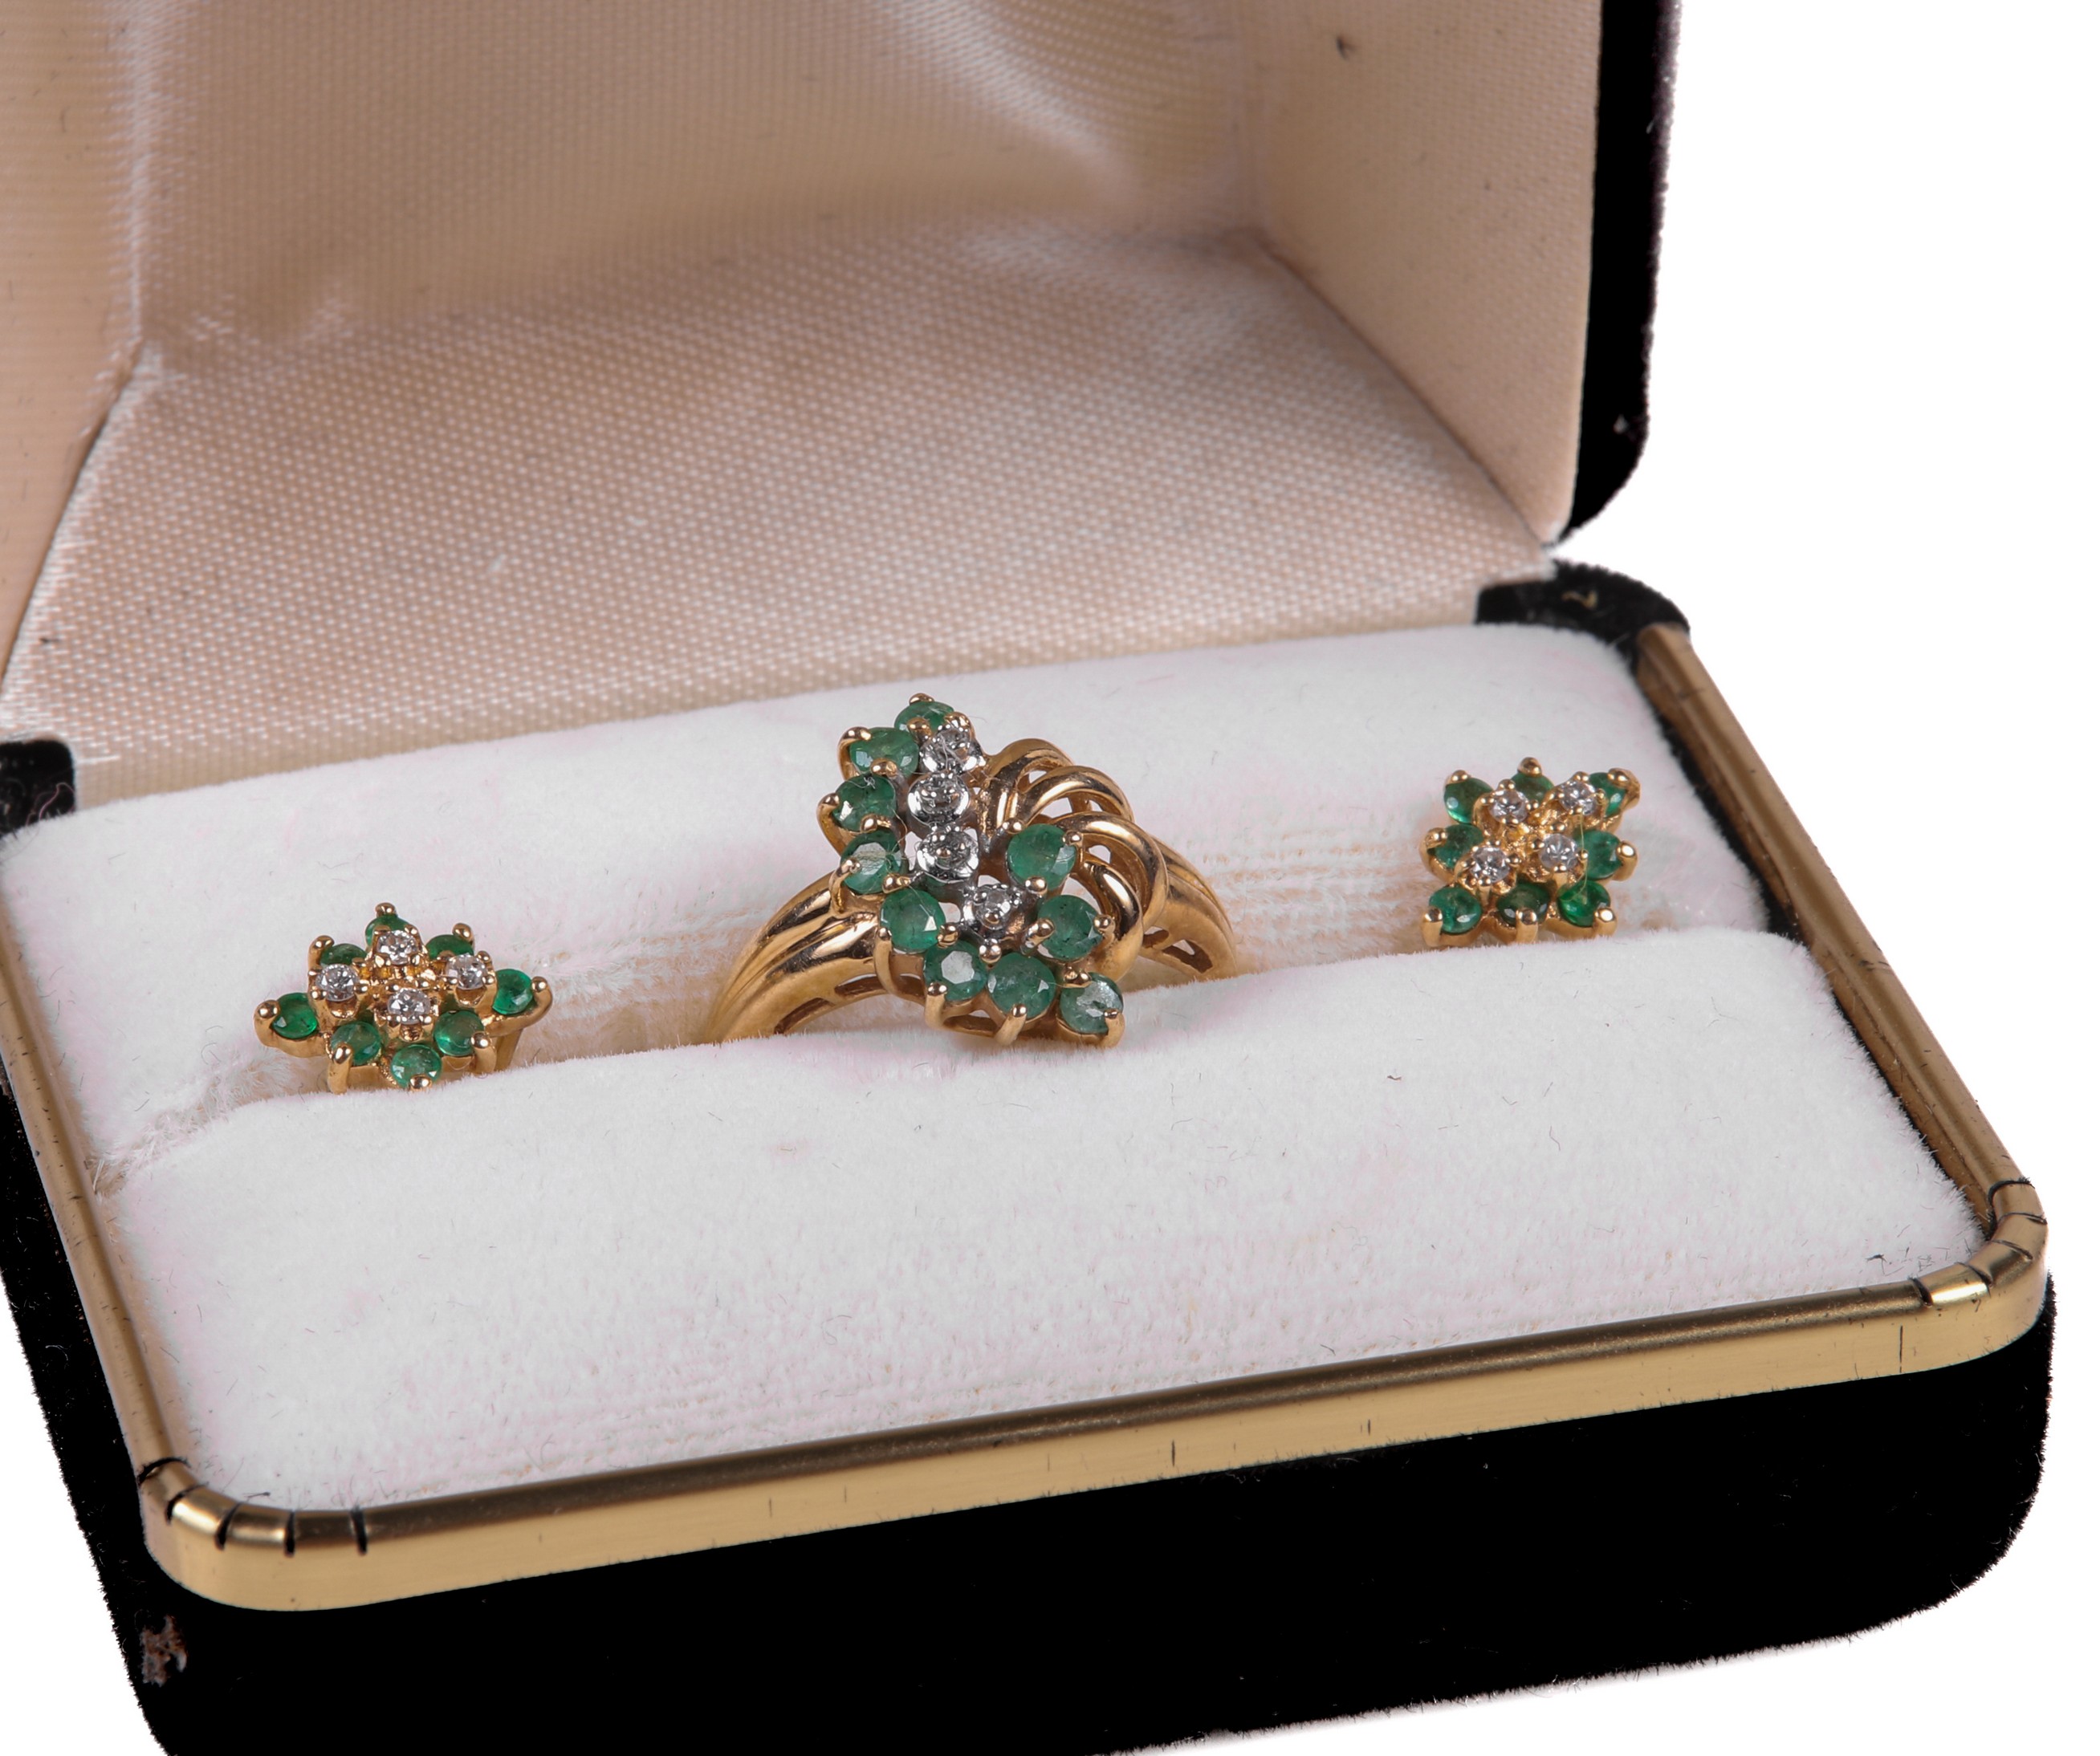 14K YG green stone ring and earrings